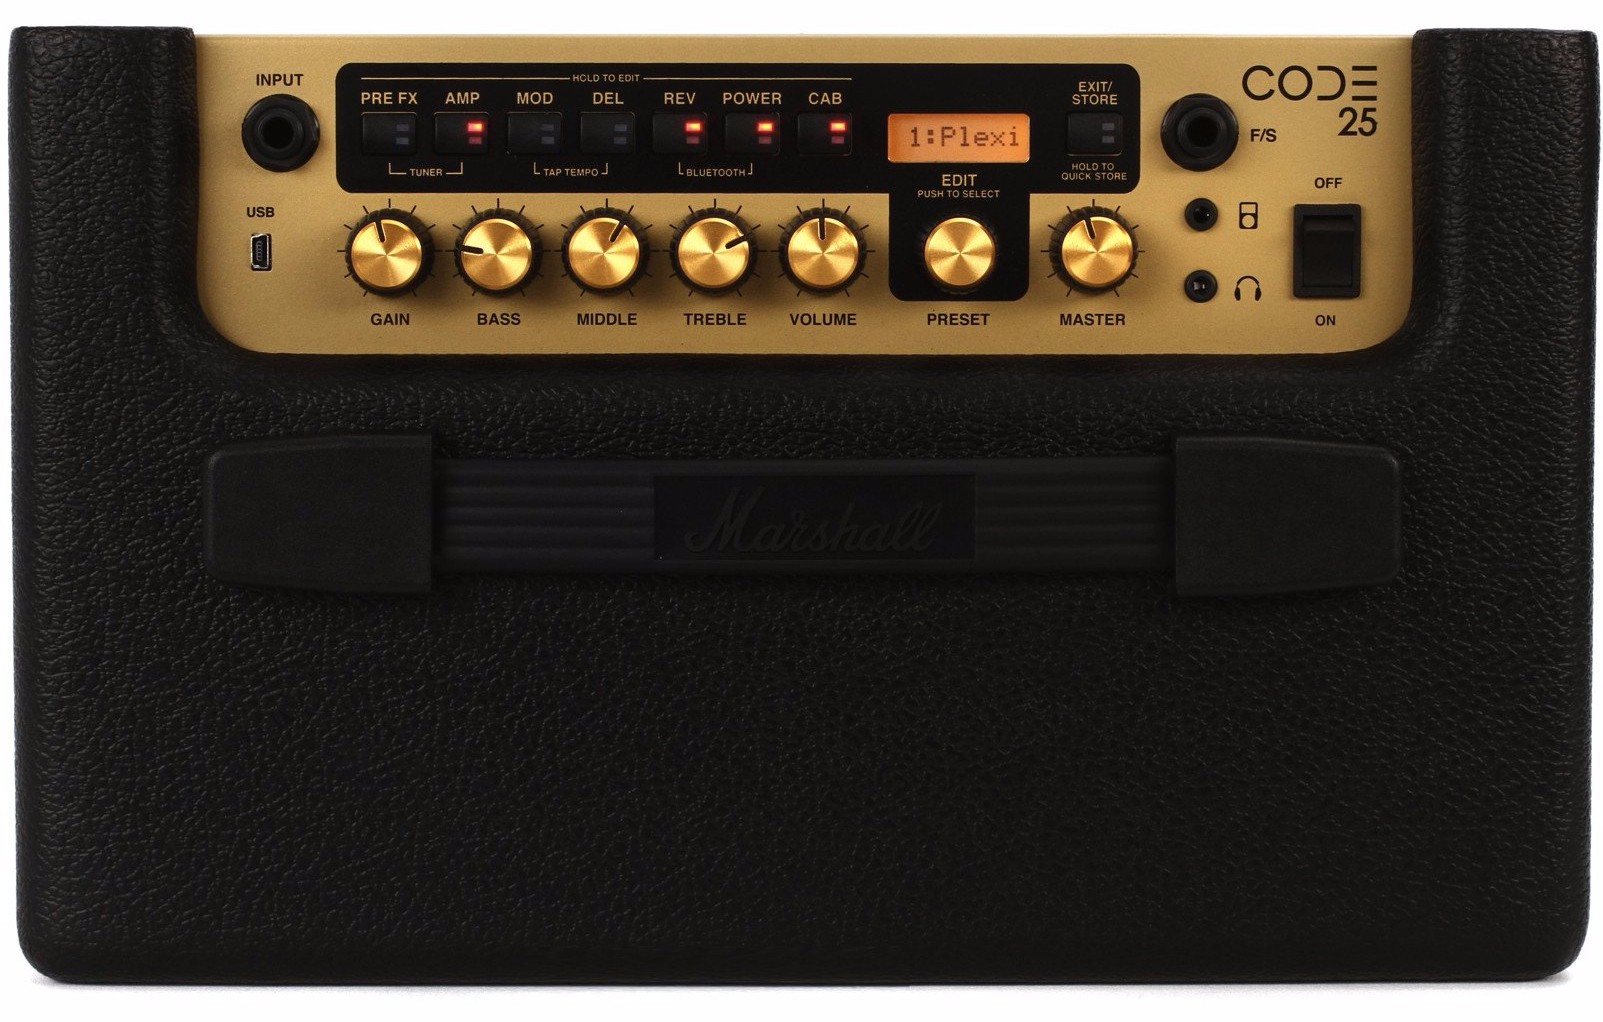 CODE25 Marshall Amps Code 25 Amplifier Part